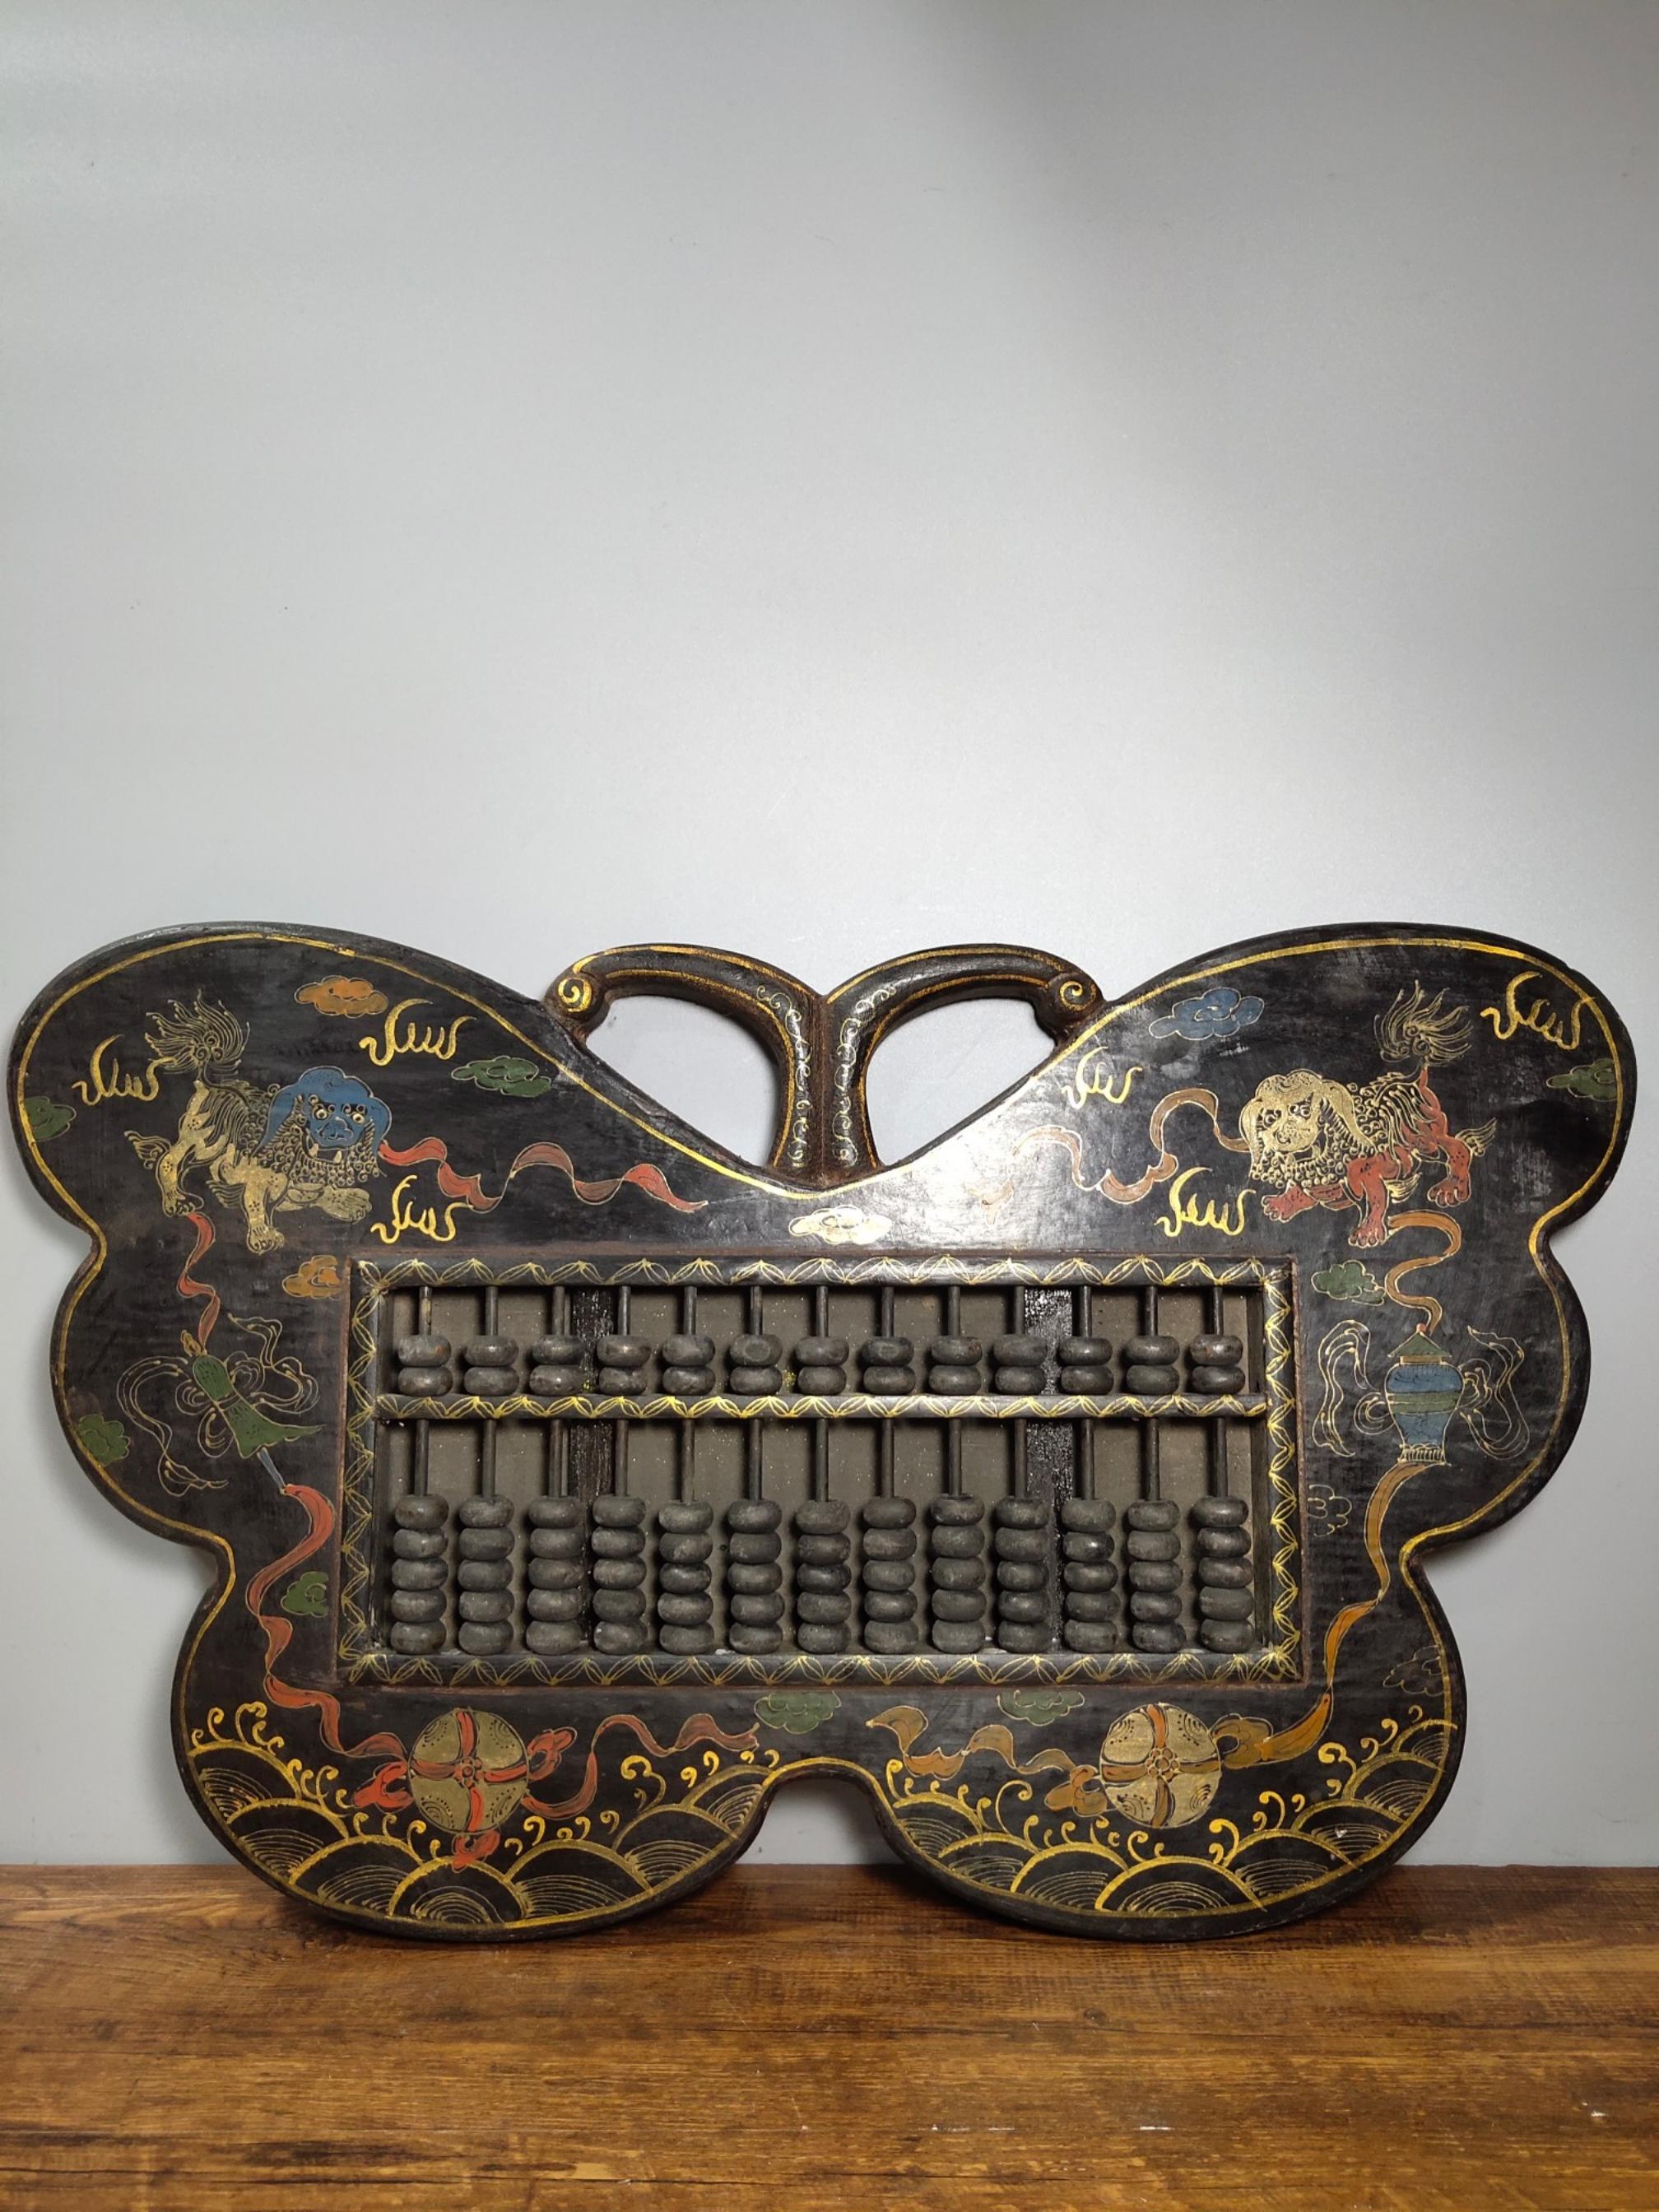 20" Tibet Buddhism Temple Old wood lacquerware abacus Lion Rolling Hydrangea Joe Bookkeeping Room Abacus Accounting abacus